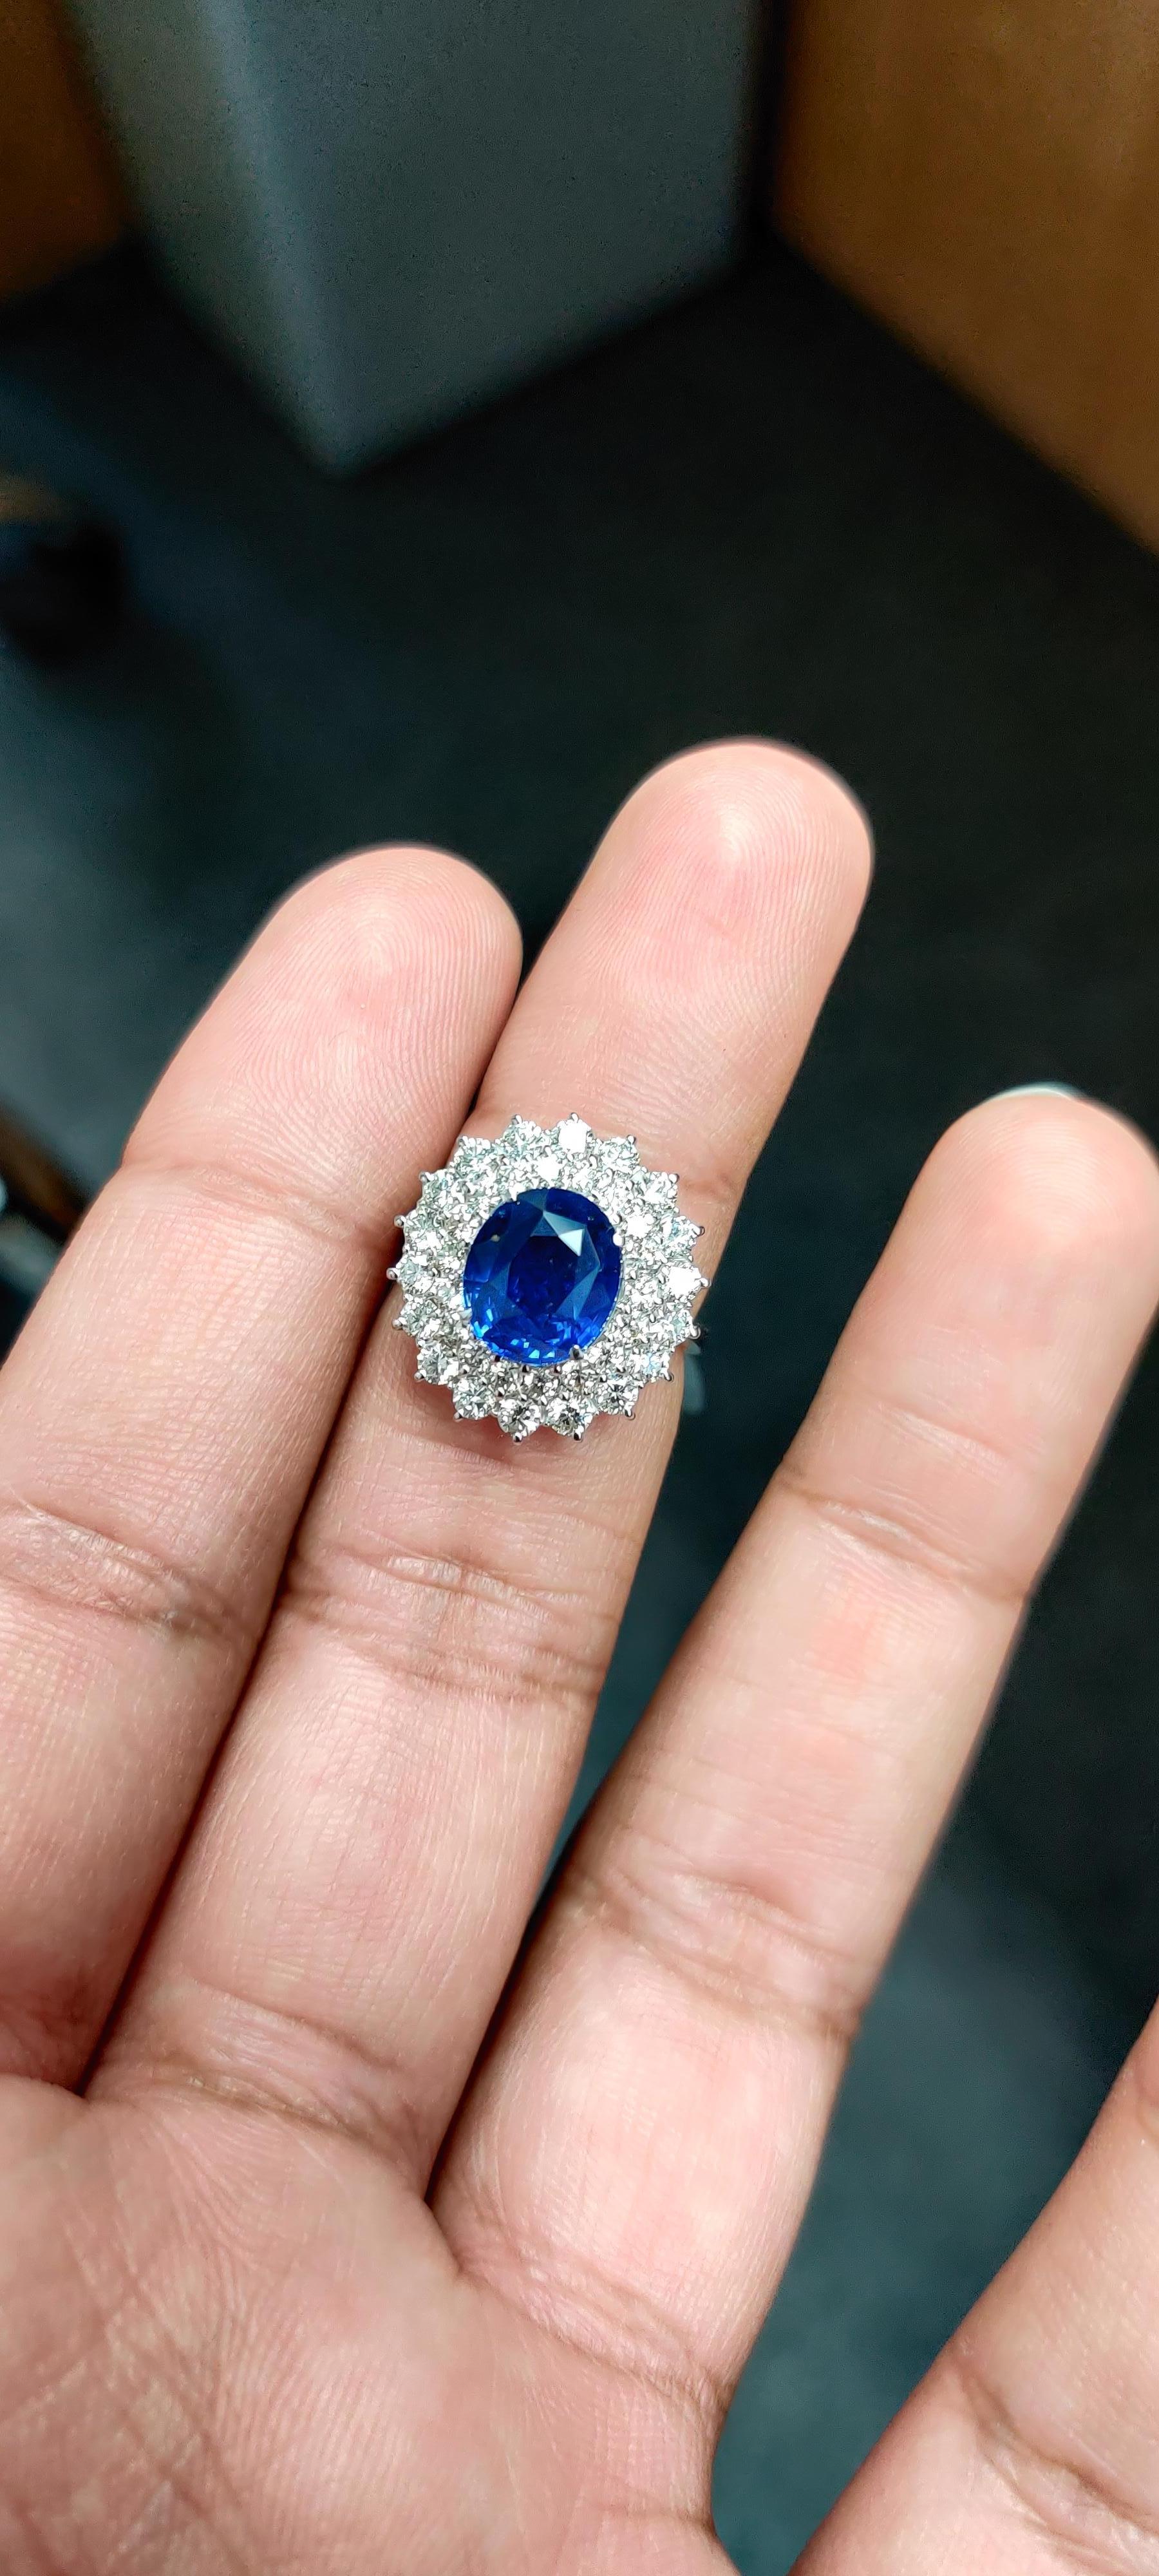 Introducing our exquisite 18K Gold Sapphire Ring, a true statement of luxury and elegance. This magnificent piece features a stunning 3.74 carat sapphire sourced from Sri Lanka, known for its exceptional quality and captivating color. Enhanced by